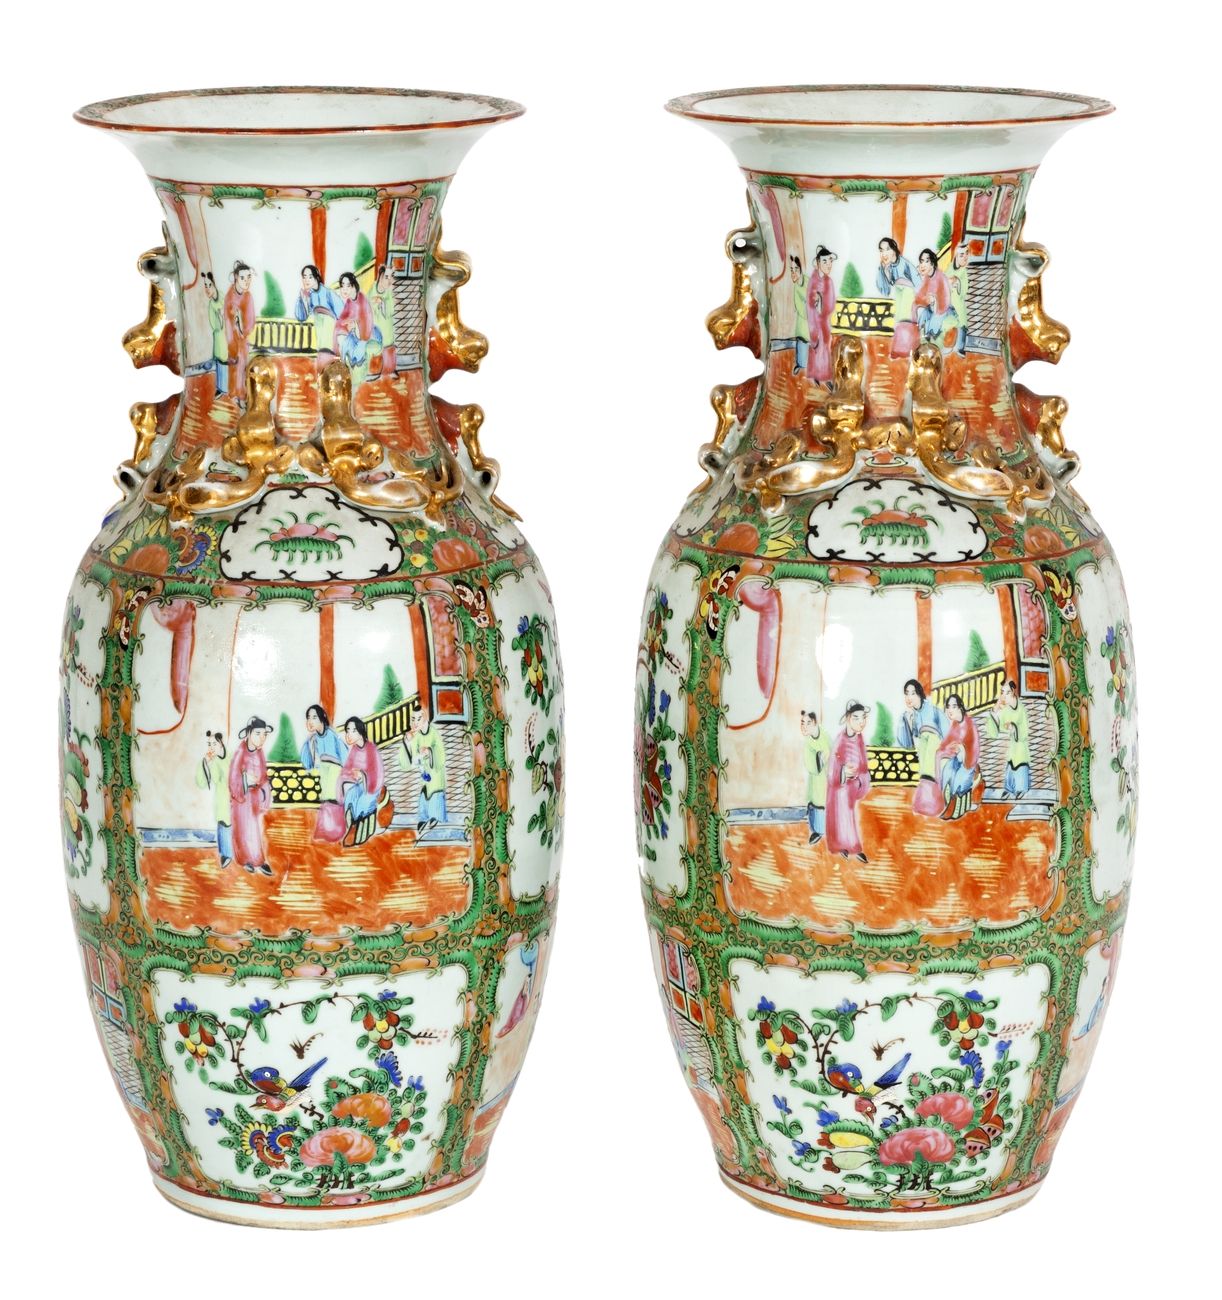 Null China, circa 1900
A pair of Canton porcelain vases decorated in Famille Ros&hellip;